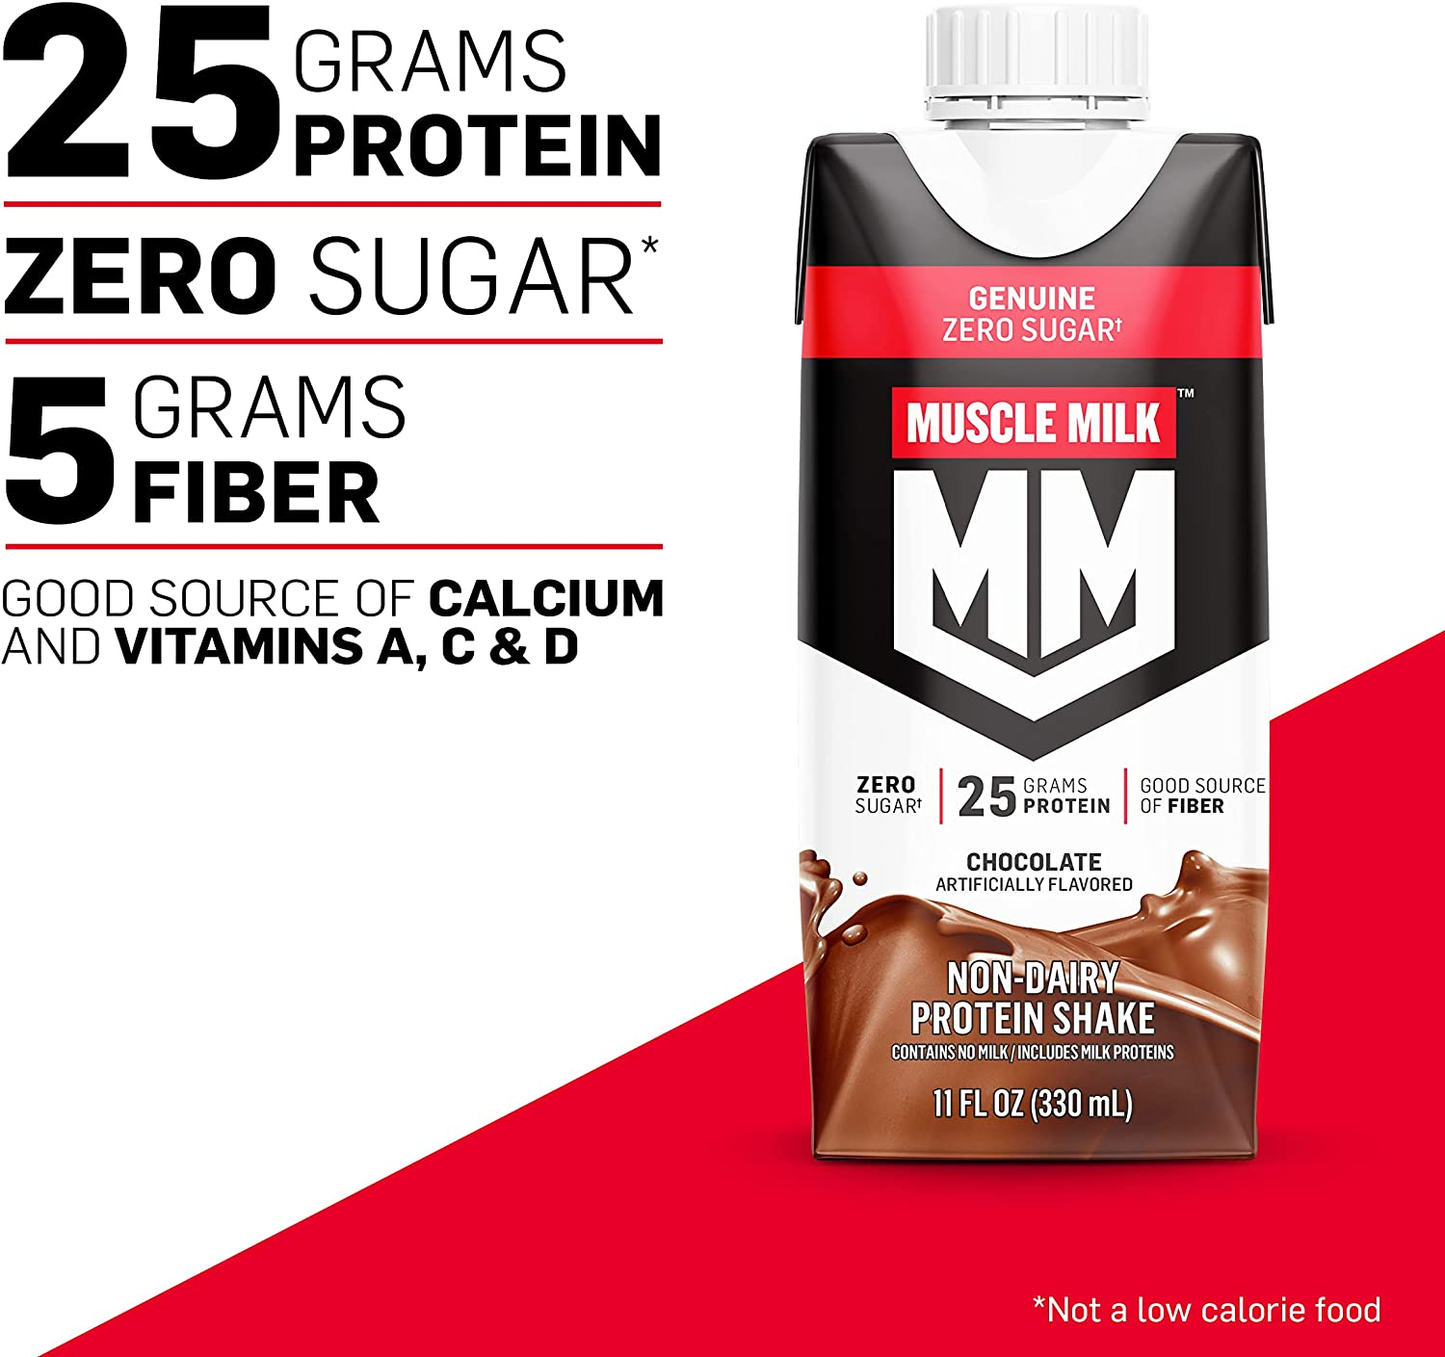 Muscle Milk Genuine Protein Shake, Chocolate, 11 Fl Oz Carton, 12 Pack, 25G Protein, Zero Sugar, Calcium, Vitamins A, C & D, 5G Fiber, Energizing Snack, Workout Recovery, Packaging May Vary